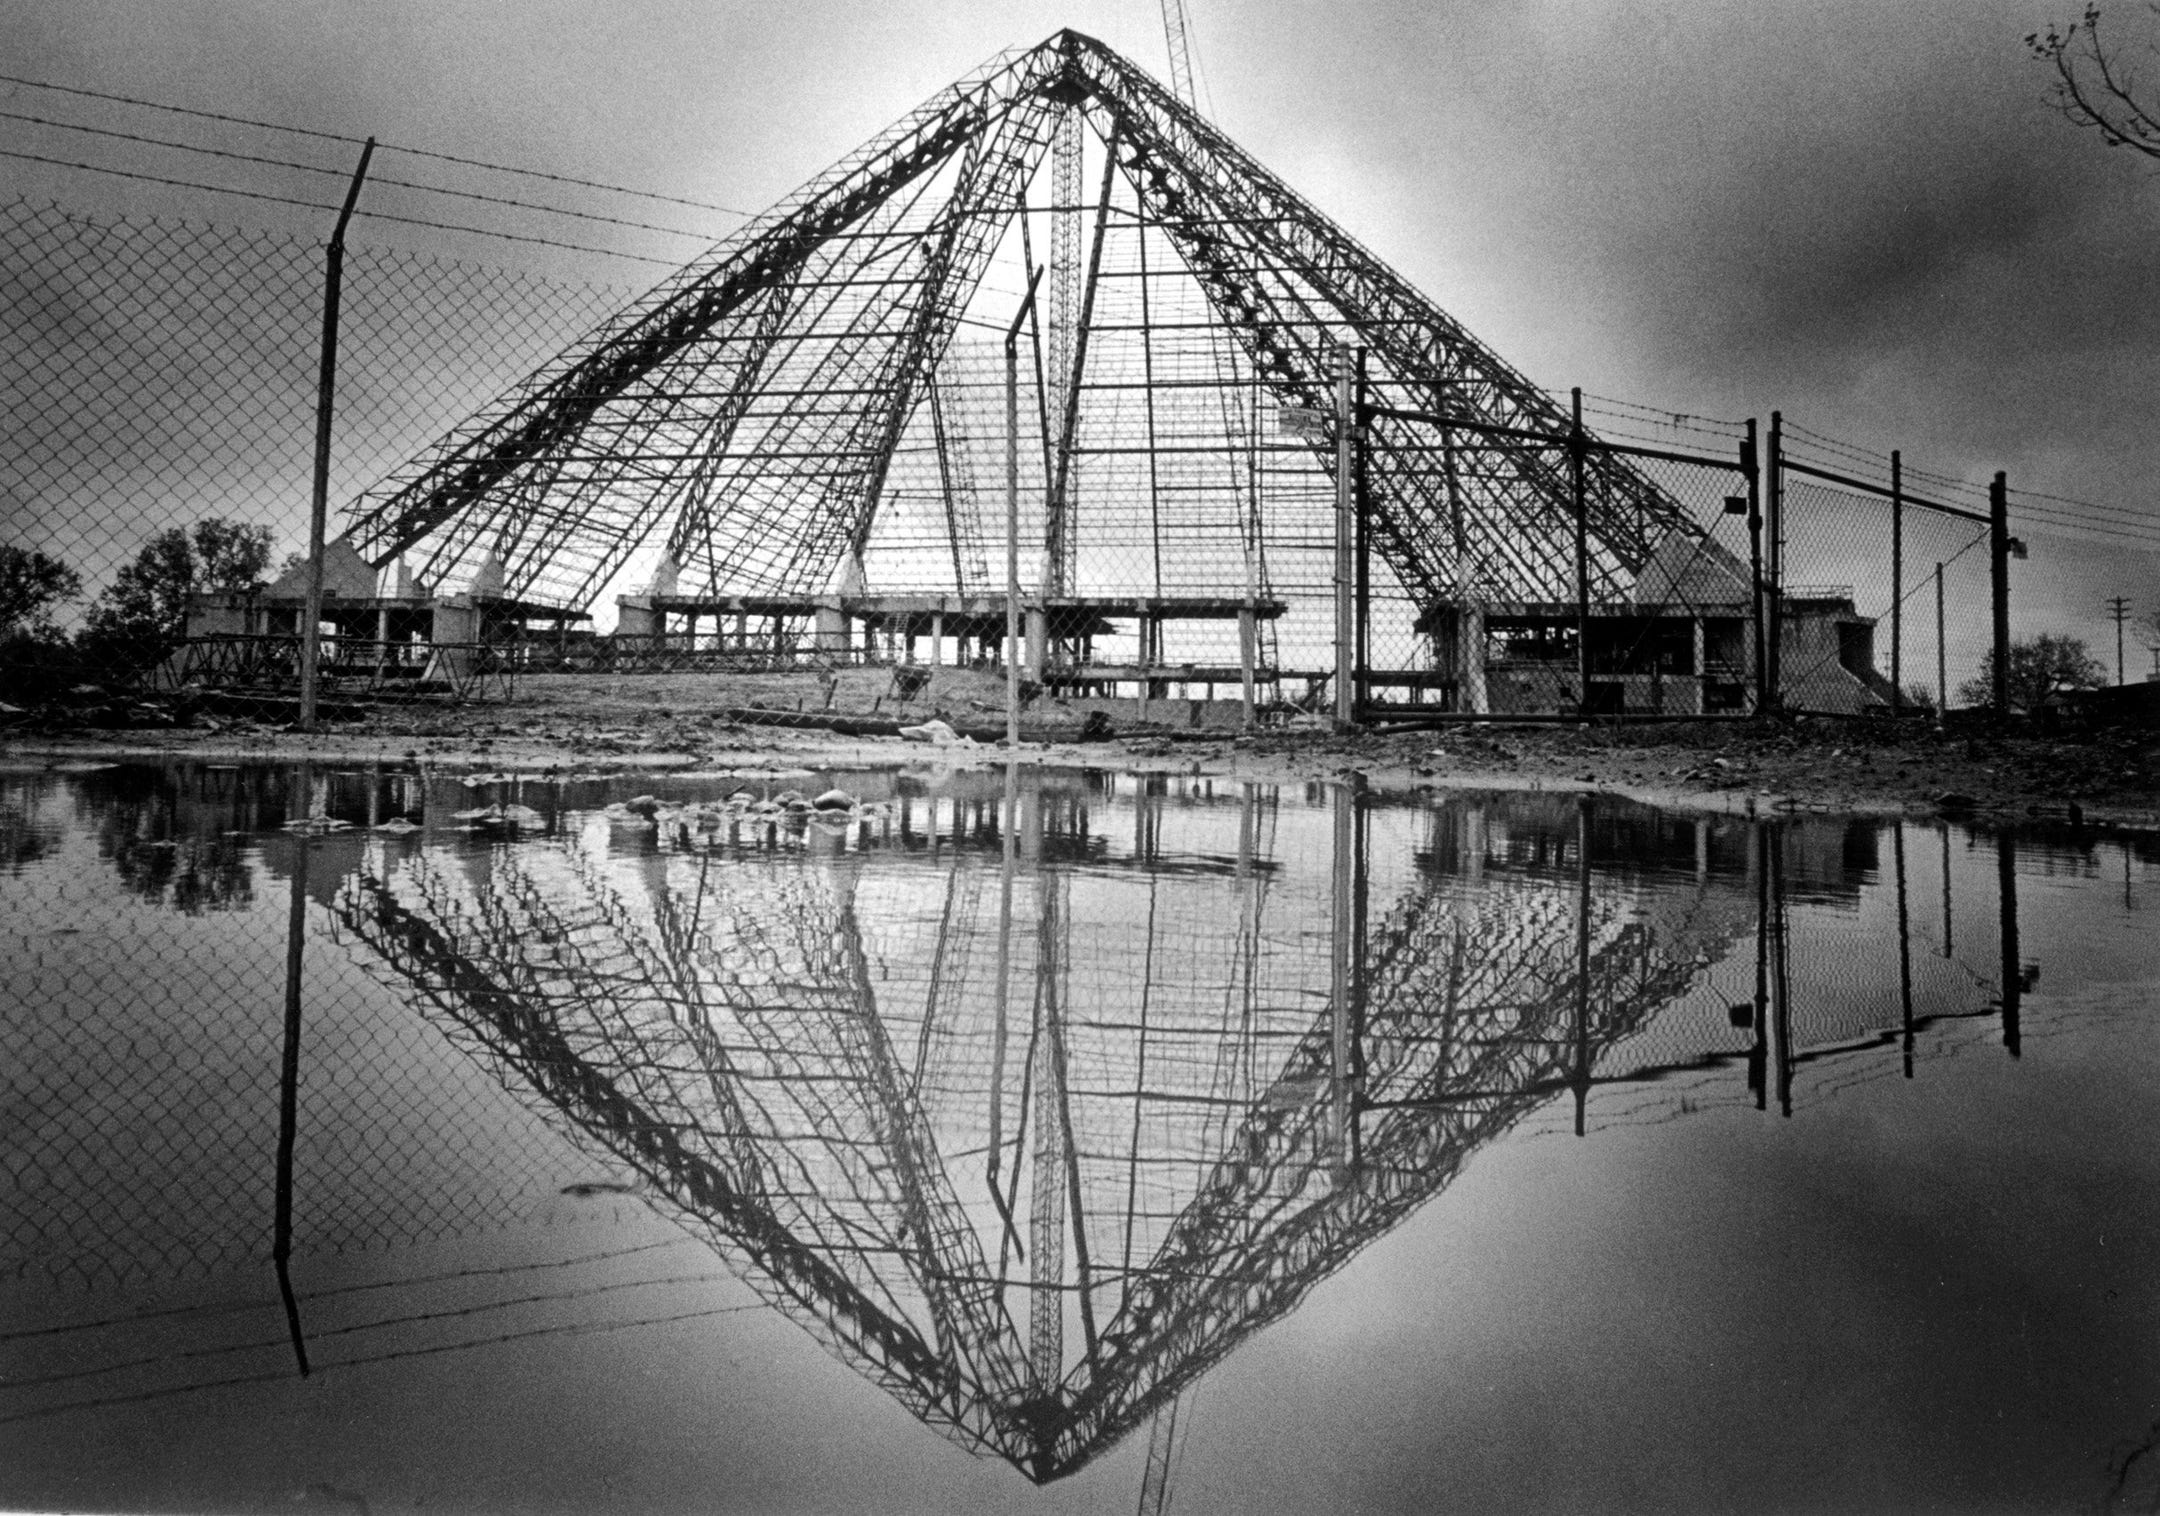 Memphis Pyramid turns 30: From home of Tigers and Grizzlies to